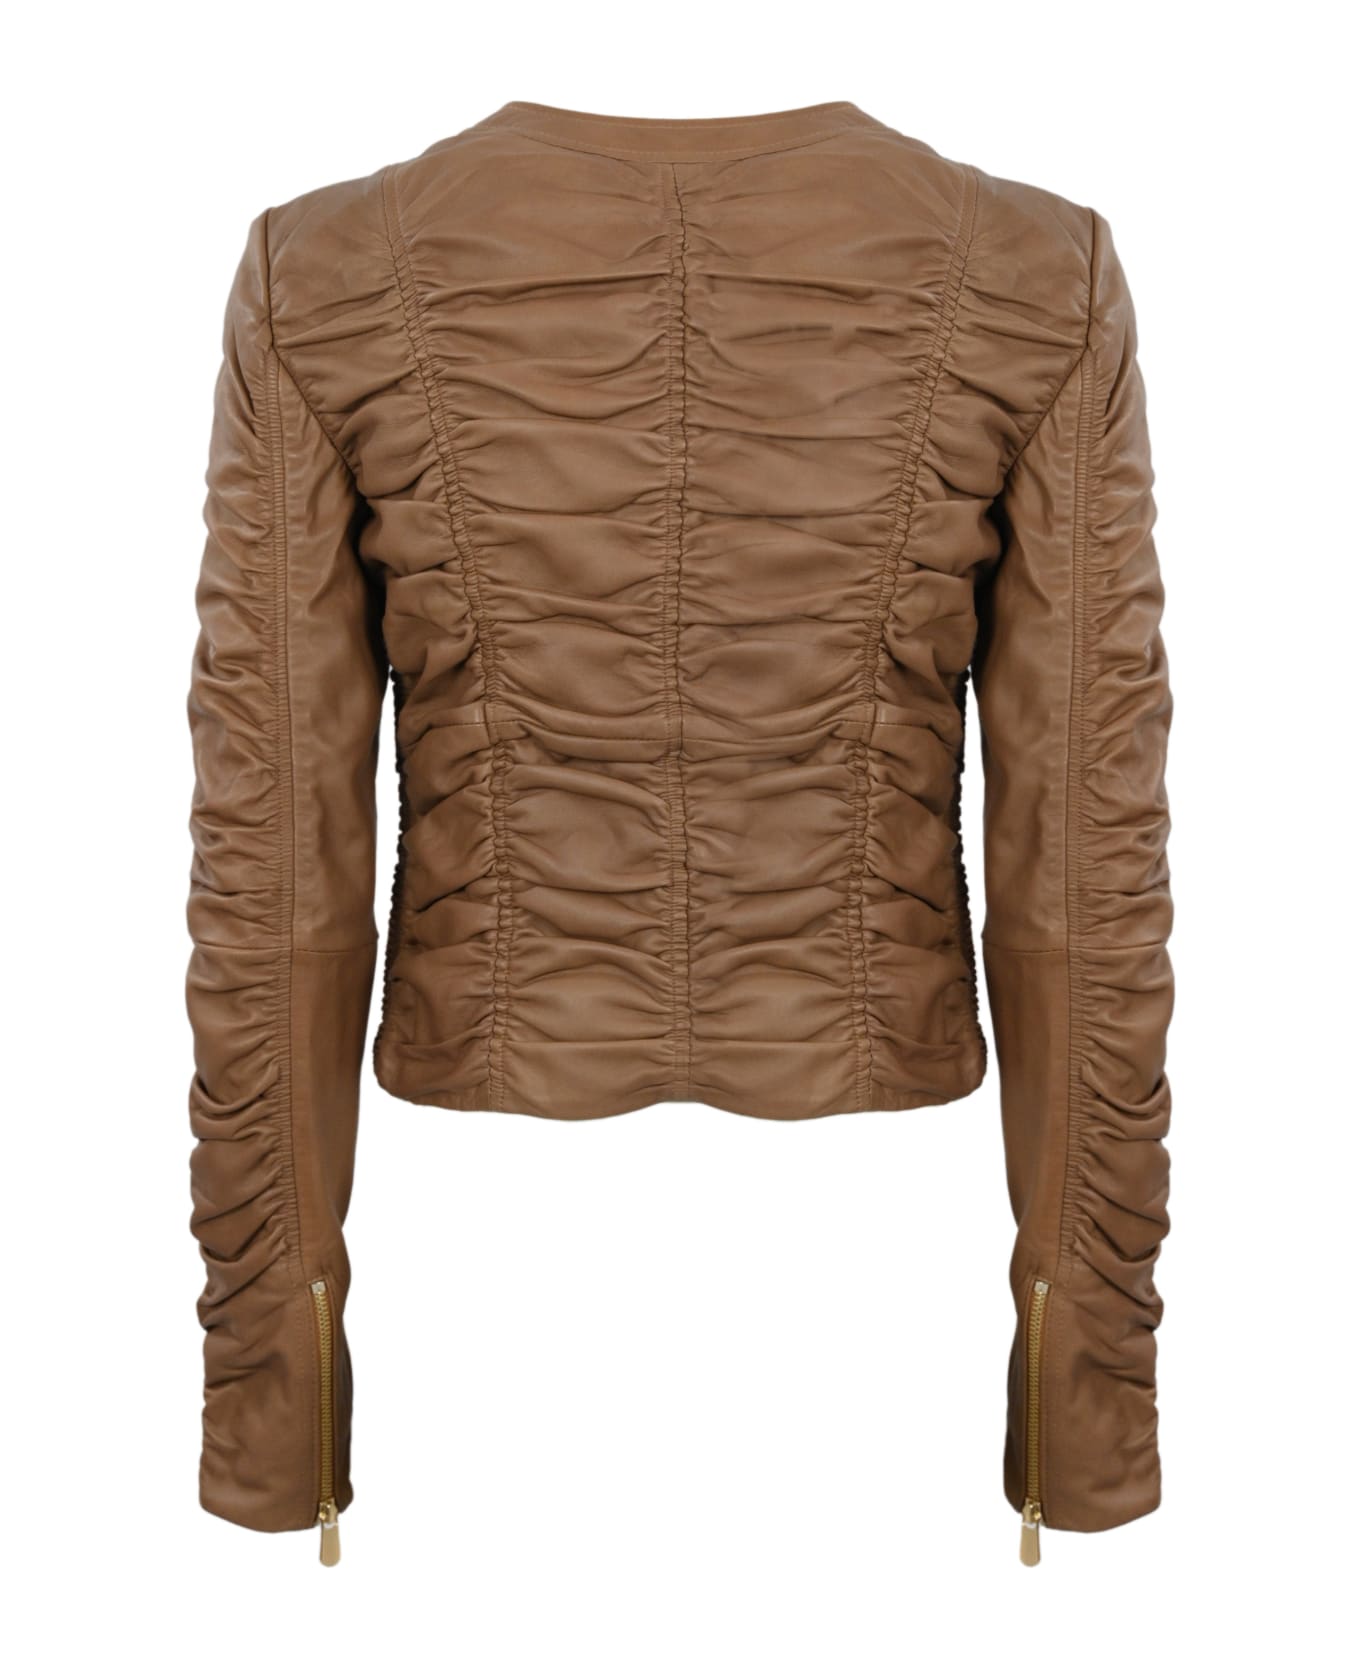 Pinko Ruched Detail Leather Jacket - Noce レザージャケット